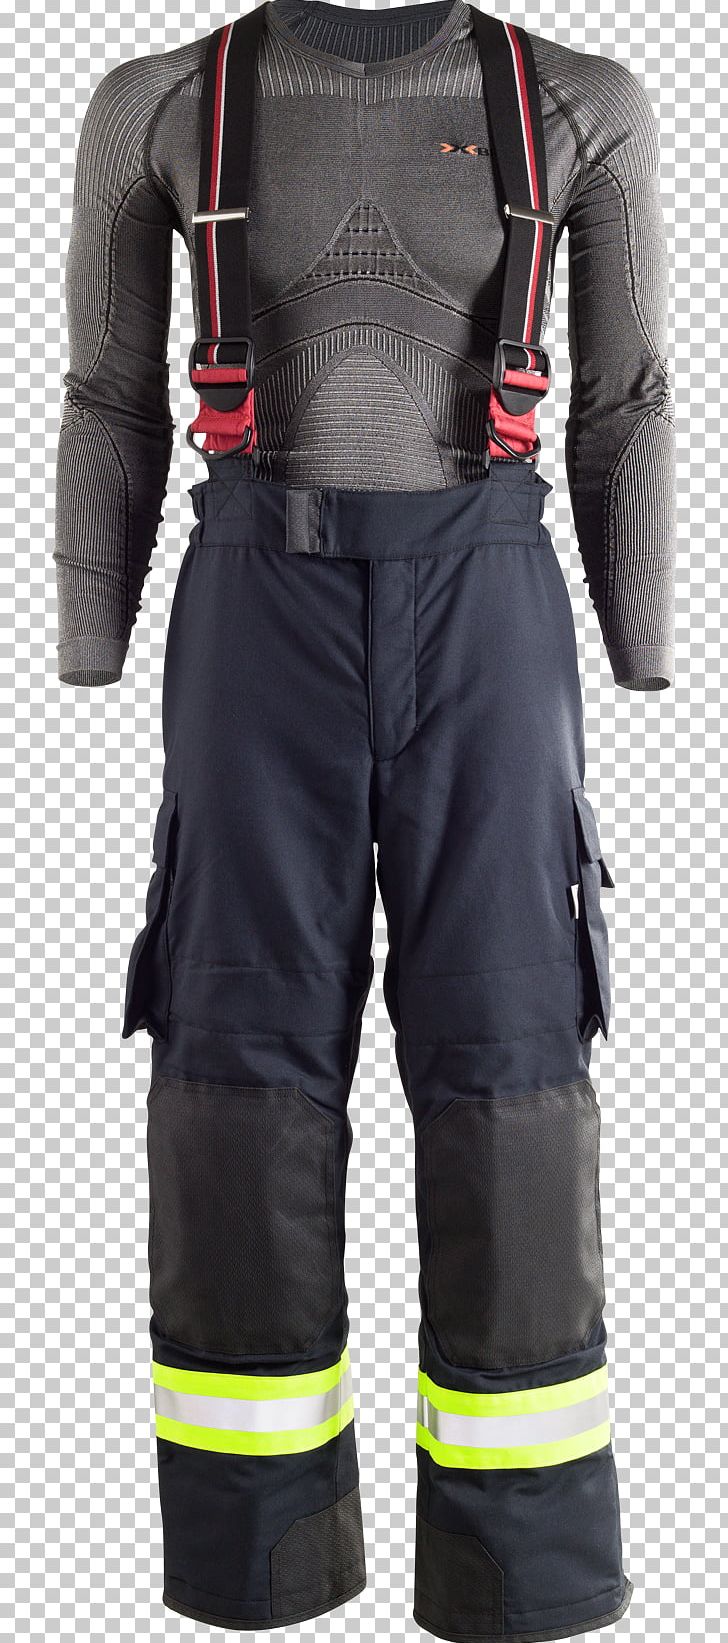 Fire Department Clothing Gore-Tex Überhose Schutzkleidung PNG, Clipart, Clothing, Fire Department, Fire Rescue, Forsthelm, Goretex Free PNG Download